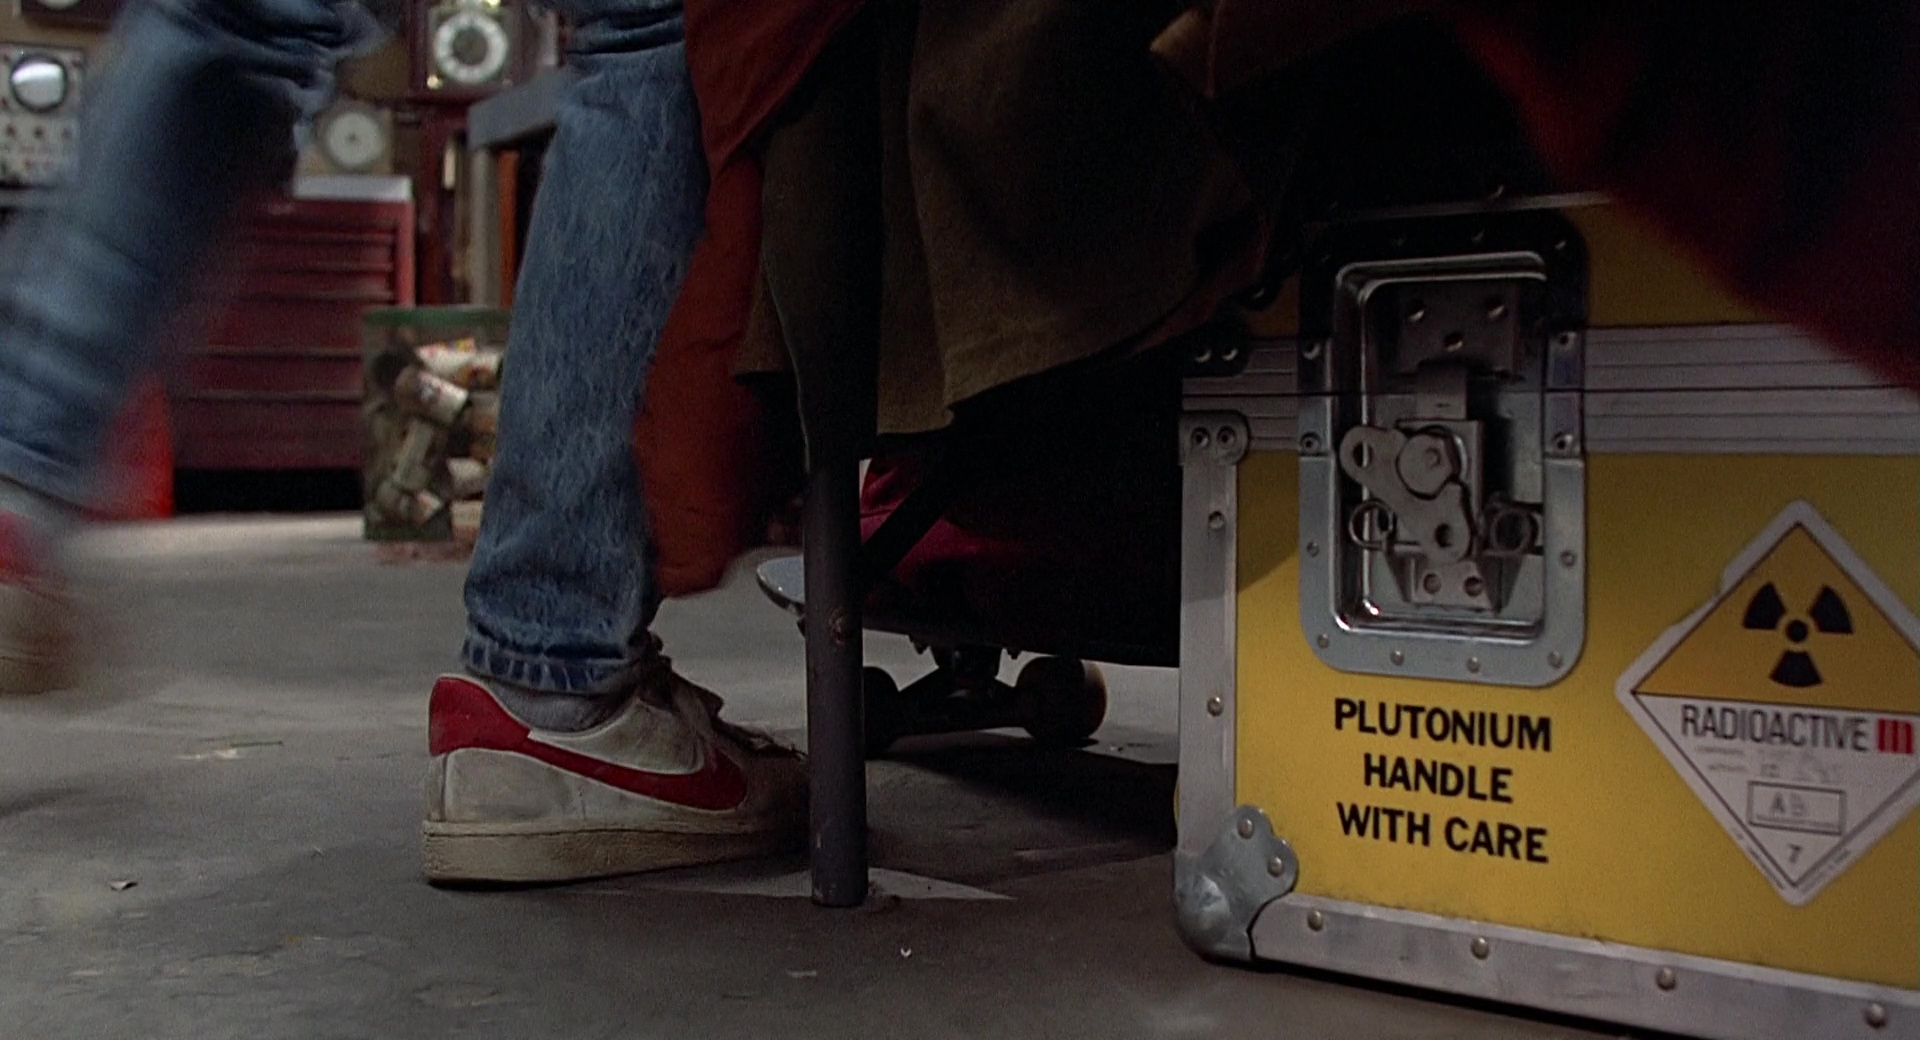 Nike Sneakers Worn By Michael J. Fox (Marty McFly) In Back The Future ( 1985)